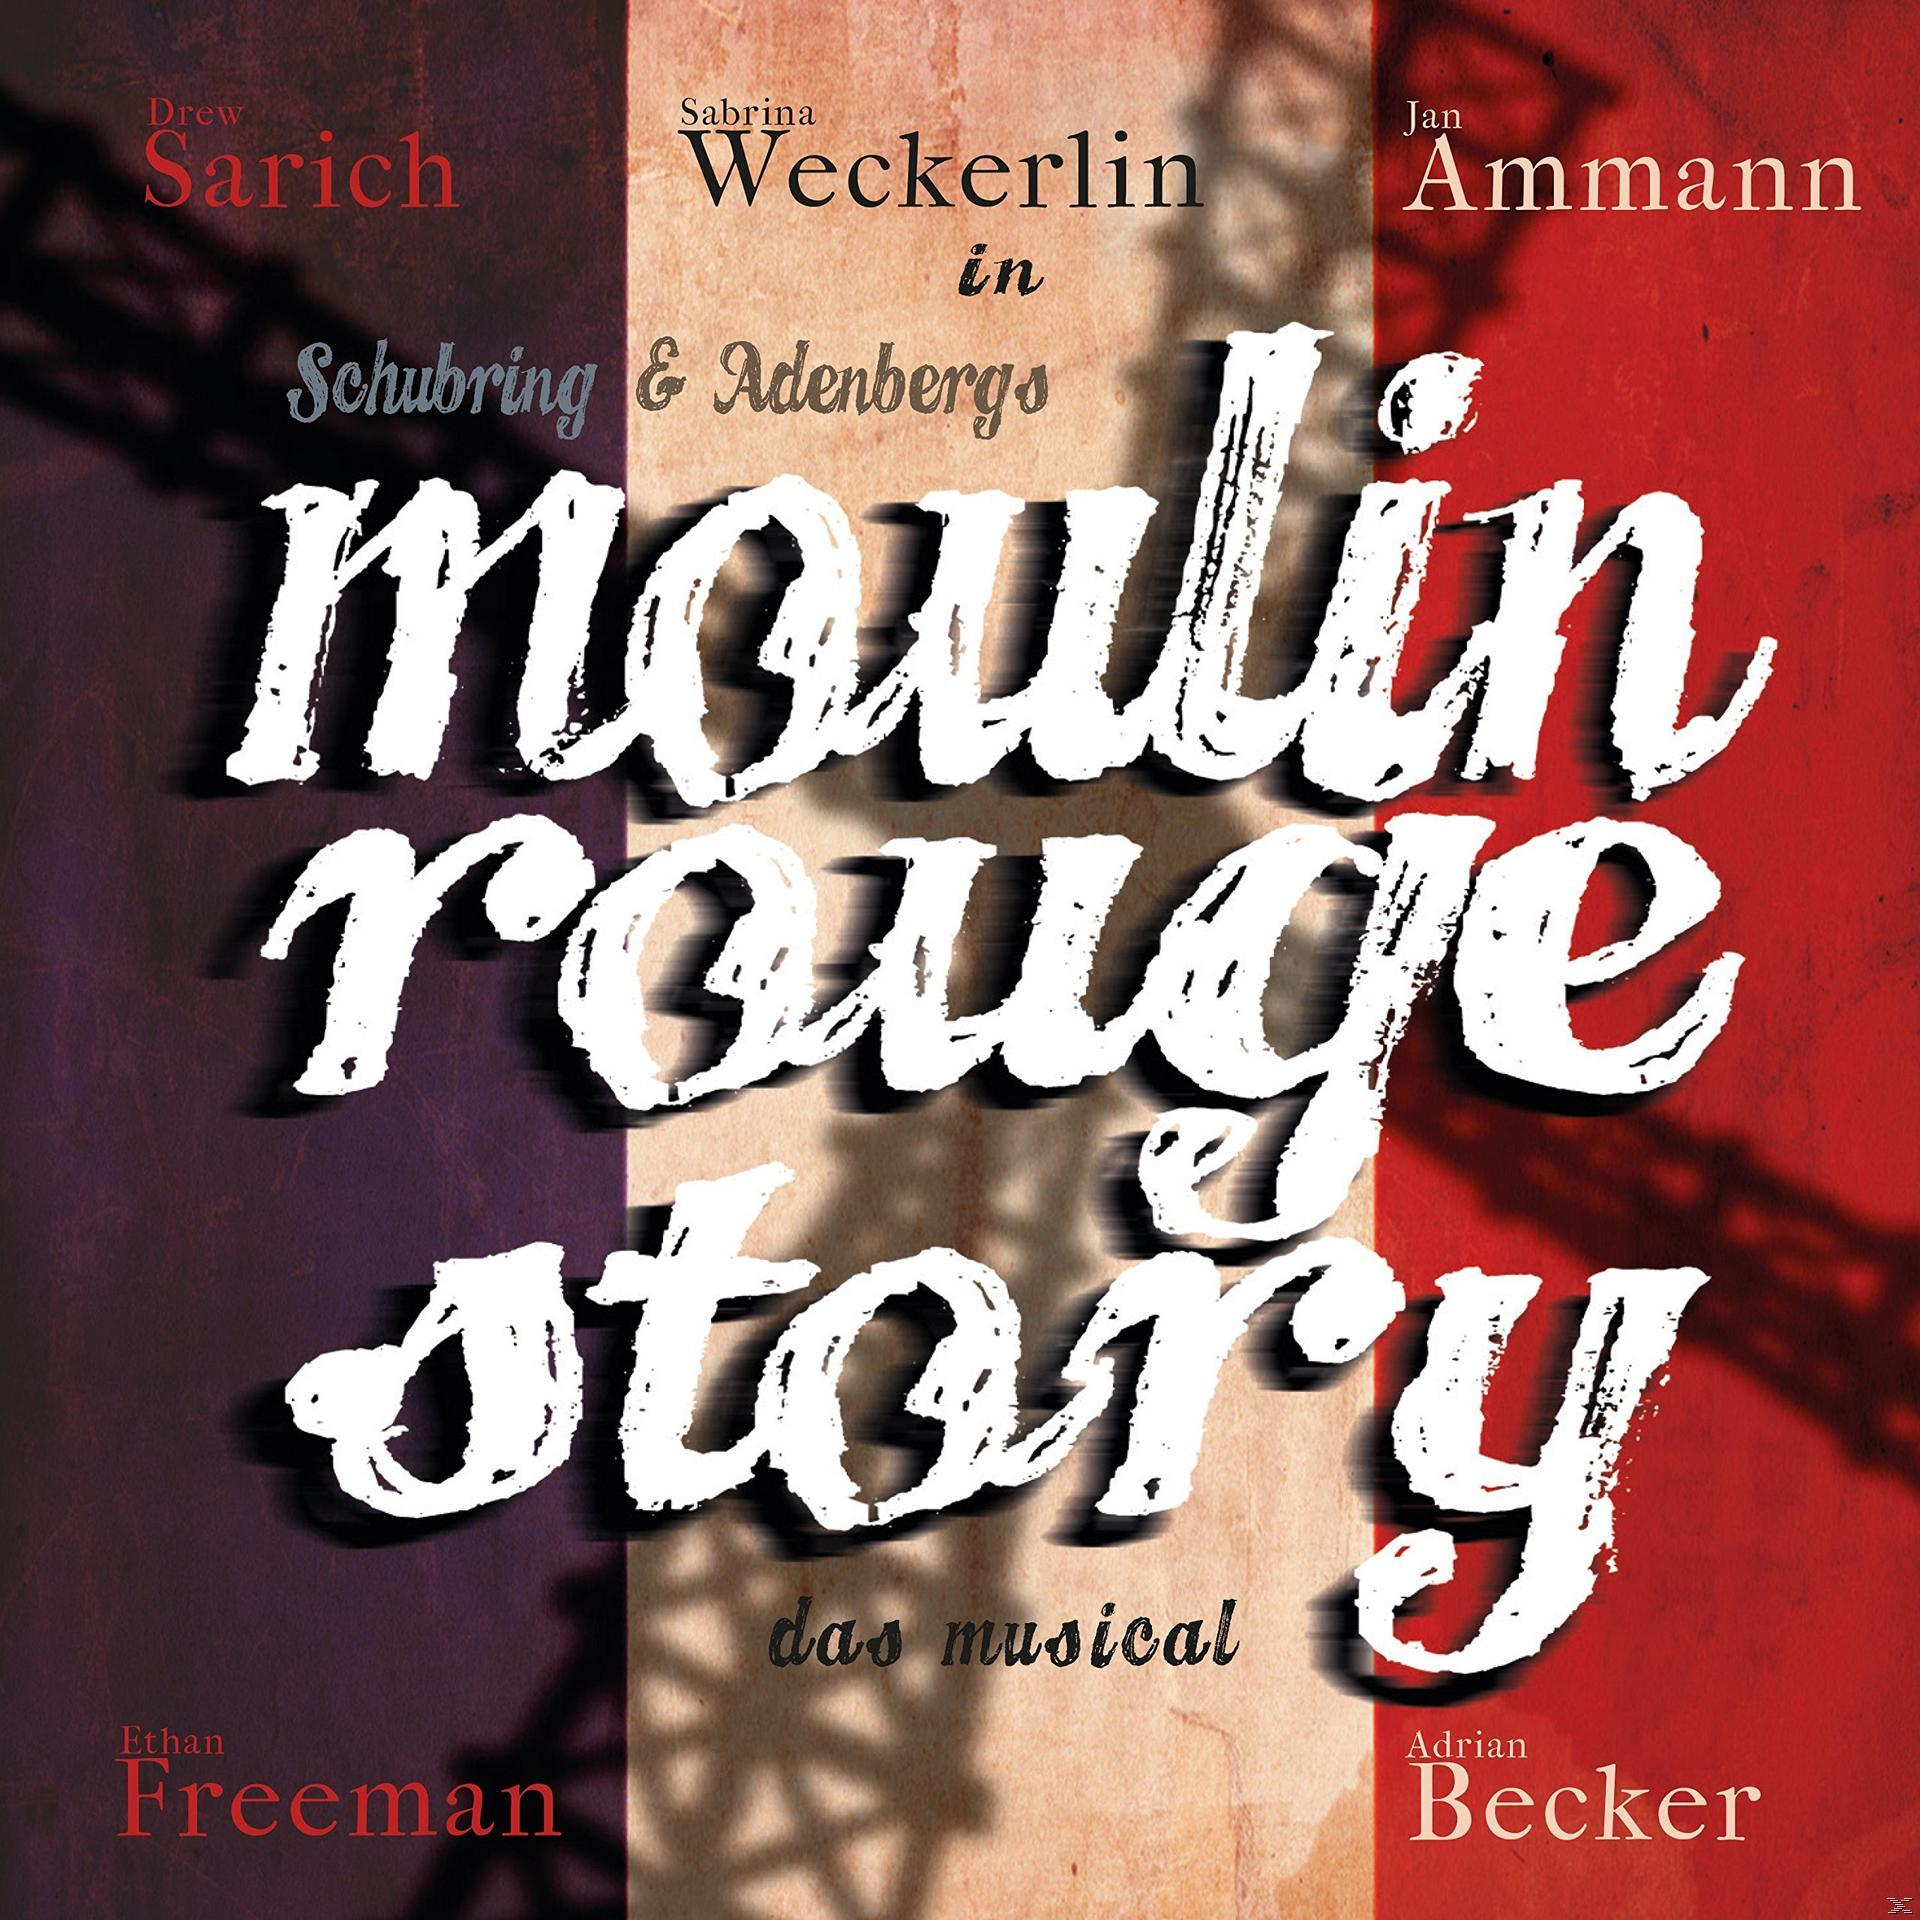 VARIOUS - Moulin Rouge Story-Das Music (CD) 